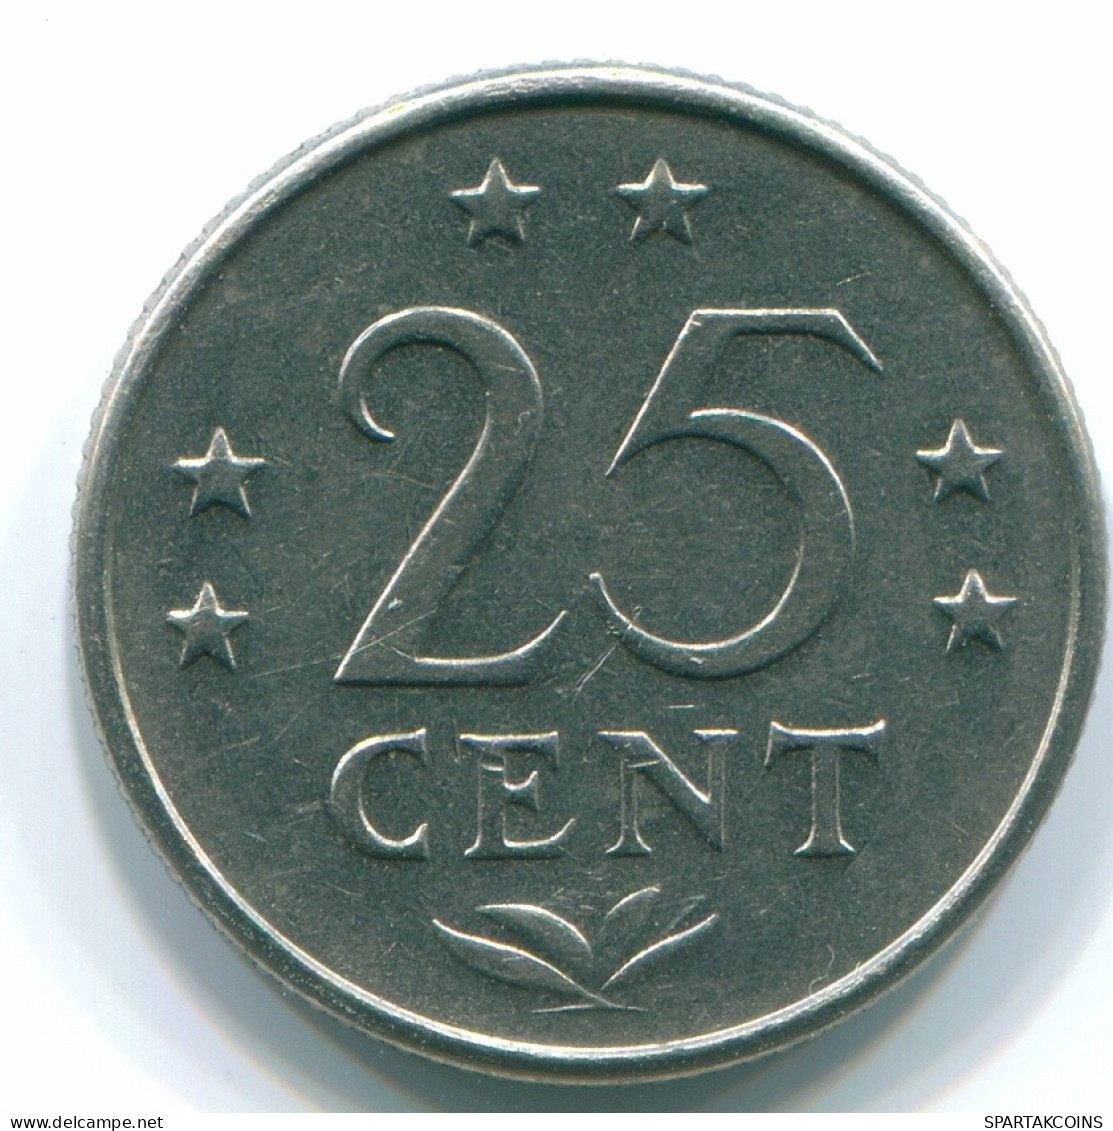 25 CENTS 1970 NETHERLANDS ANTILLES Nickel Colonial Coin #S11446.U.A - Antille Olandesi